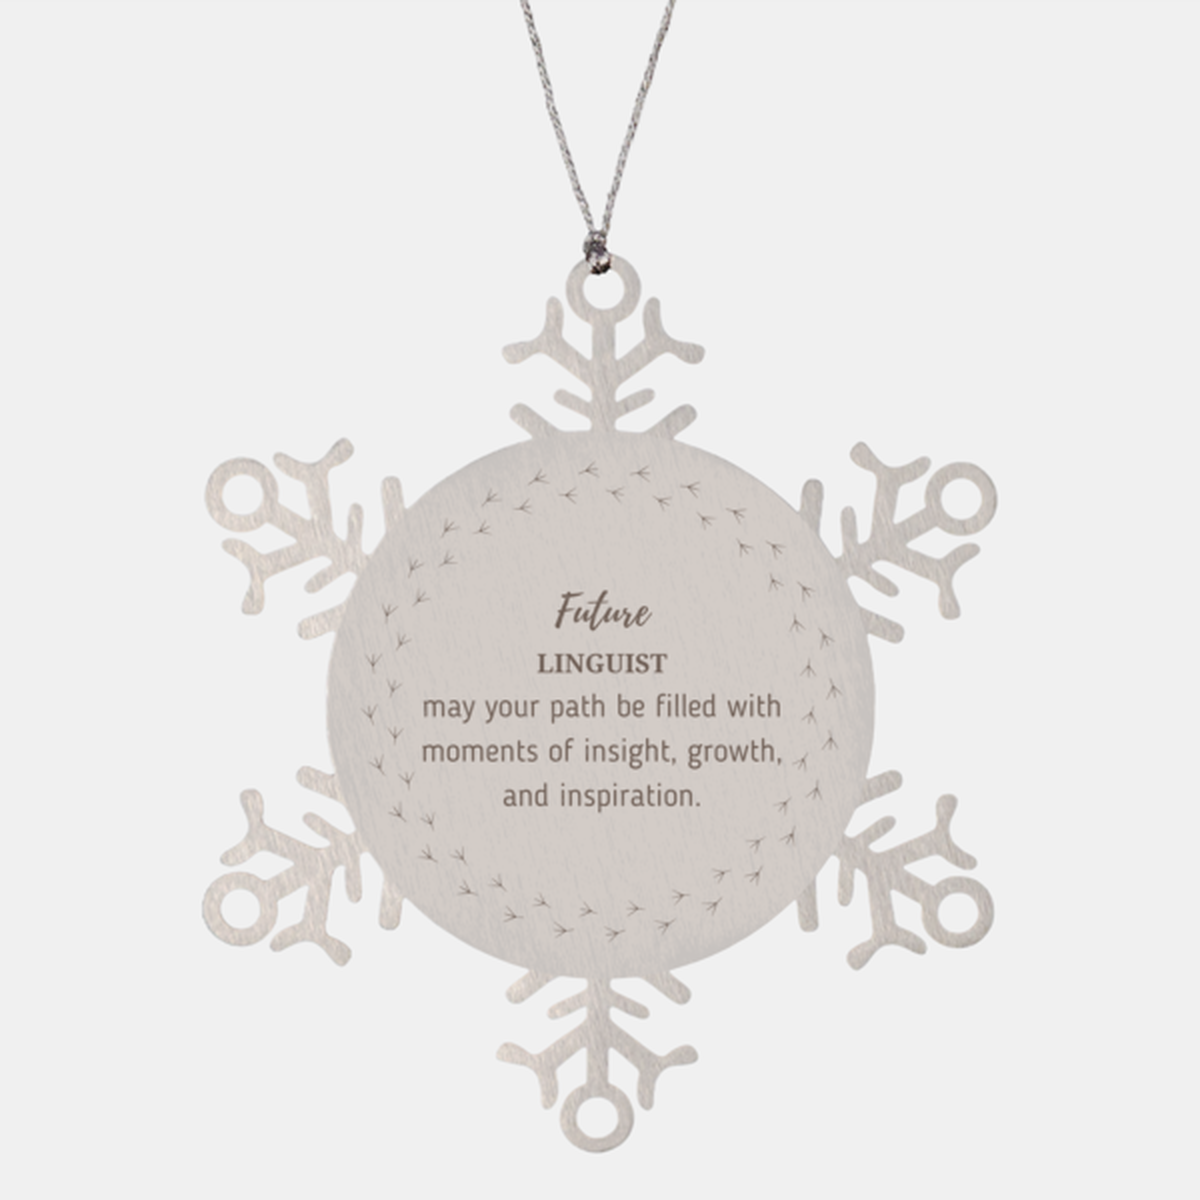 Future Linguist Gifts, May your path be filled with moments of insight, Graduation Gifts for New Linguist, Christmas Unique Snowflake Ornament For Men, Women, Friends